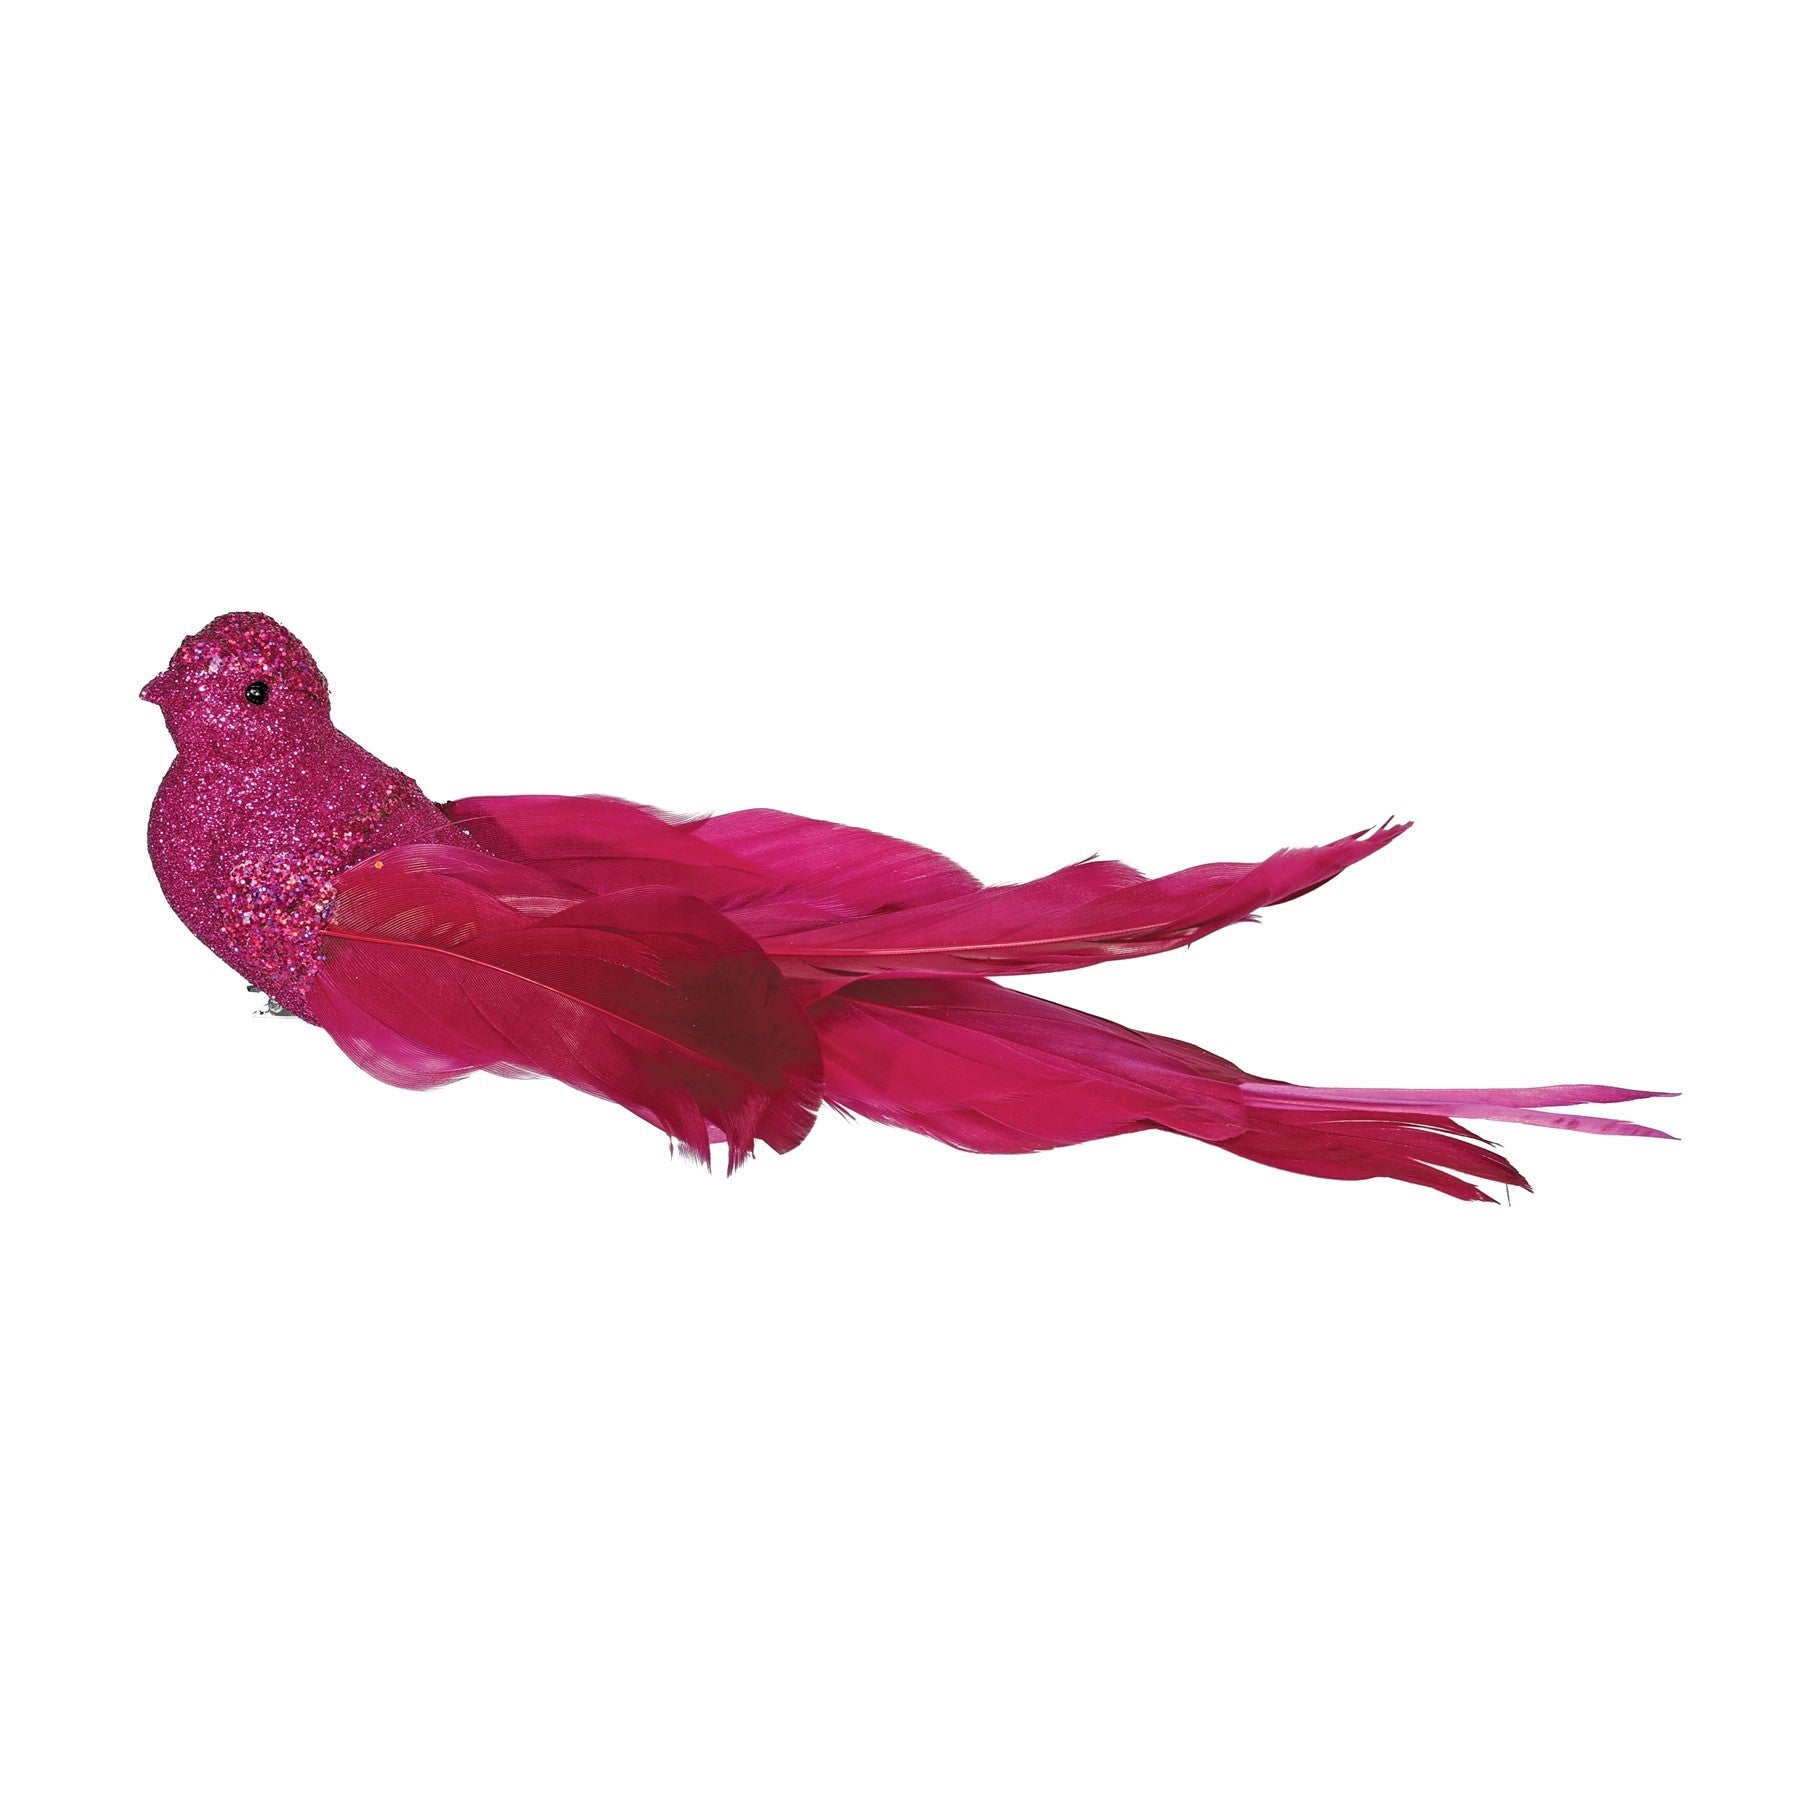 View Hot Pink Glitter Bird with Clip 23cm information